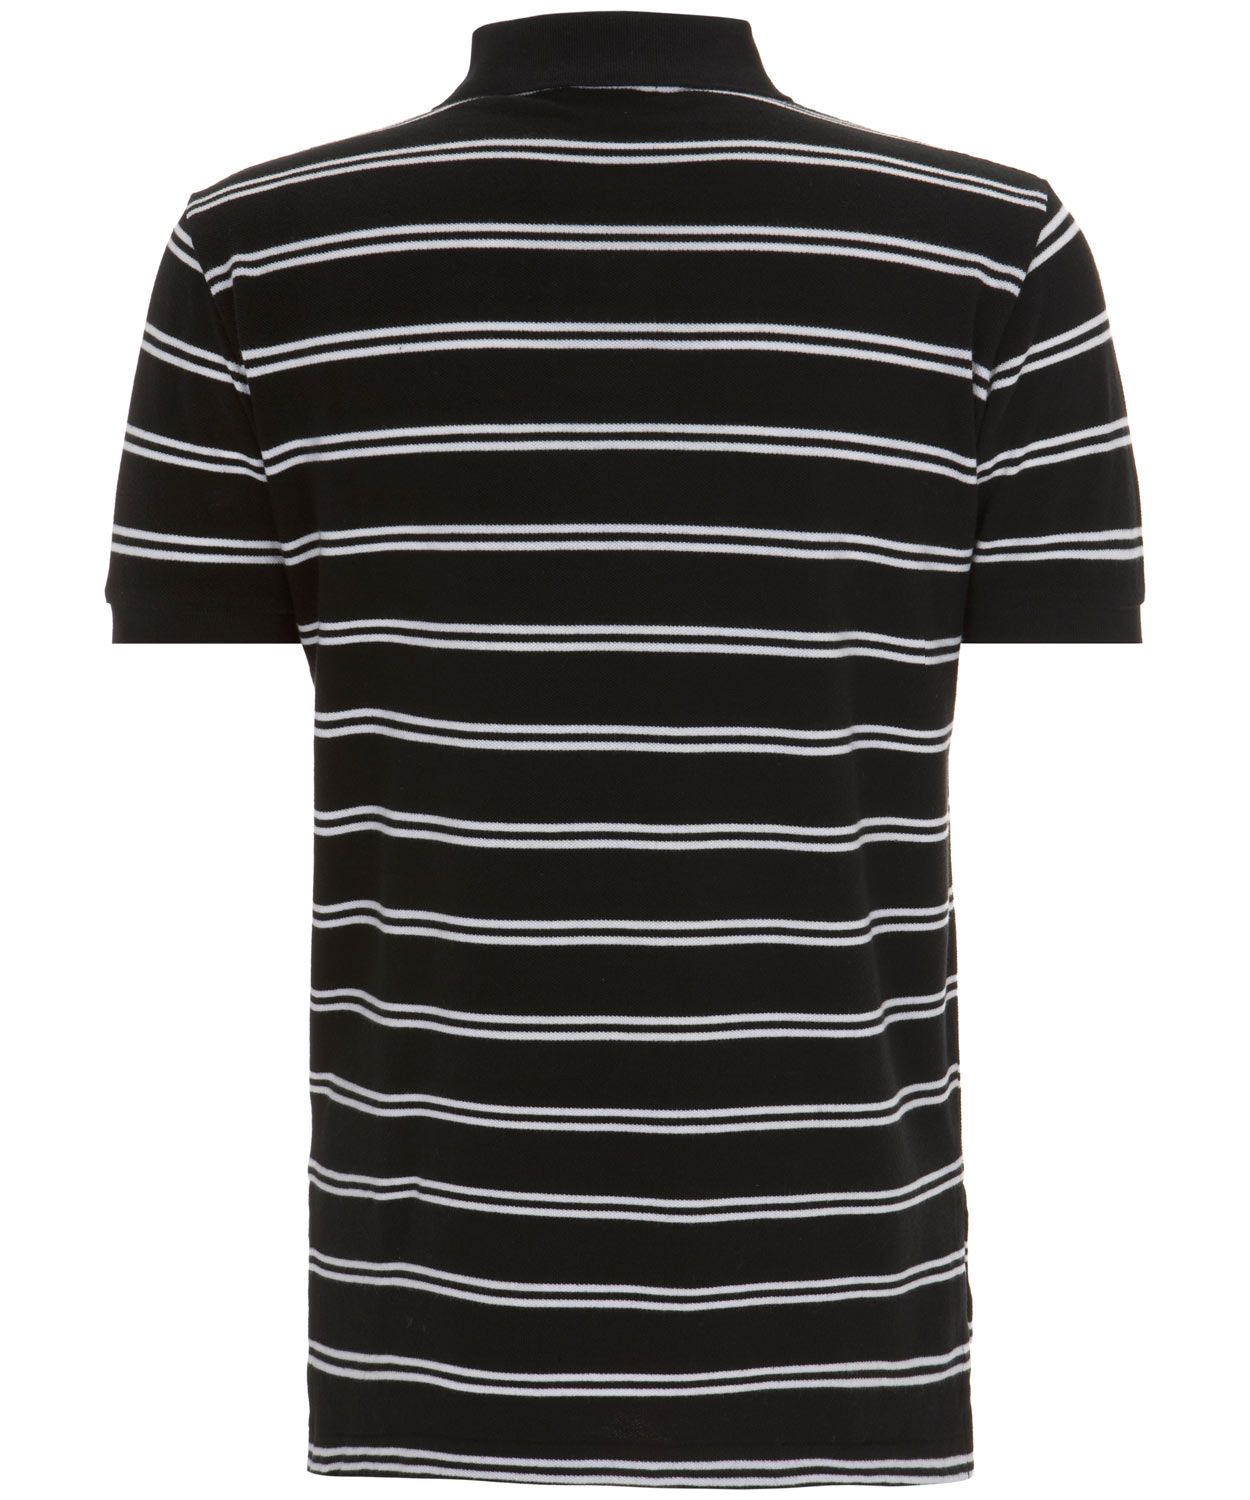 Lyst - Polo Ralph Lauren Black and White Track Stripe Polo Shirt in ...